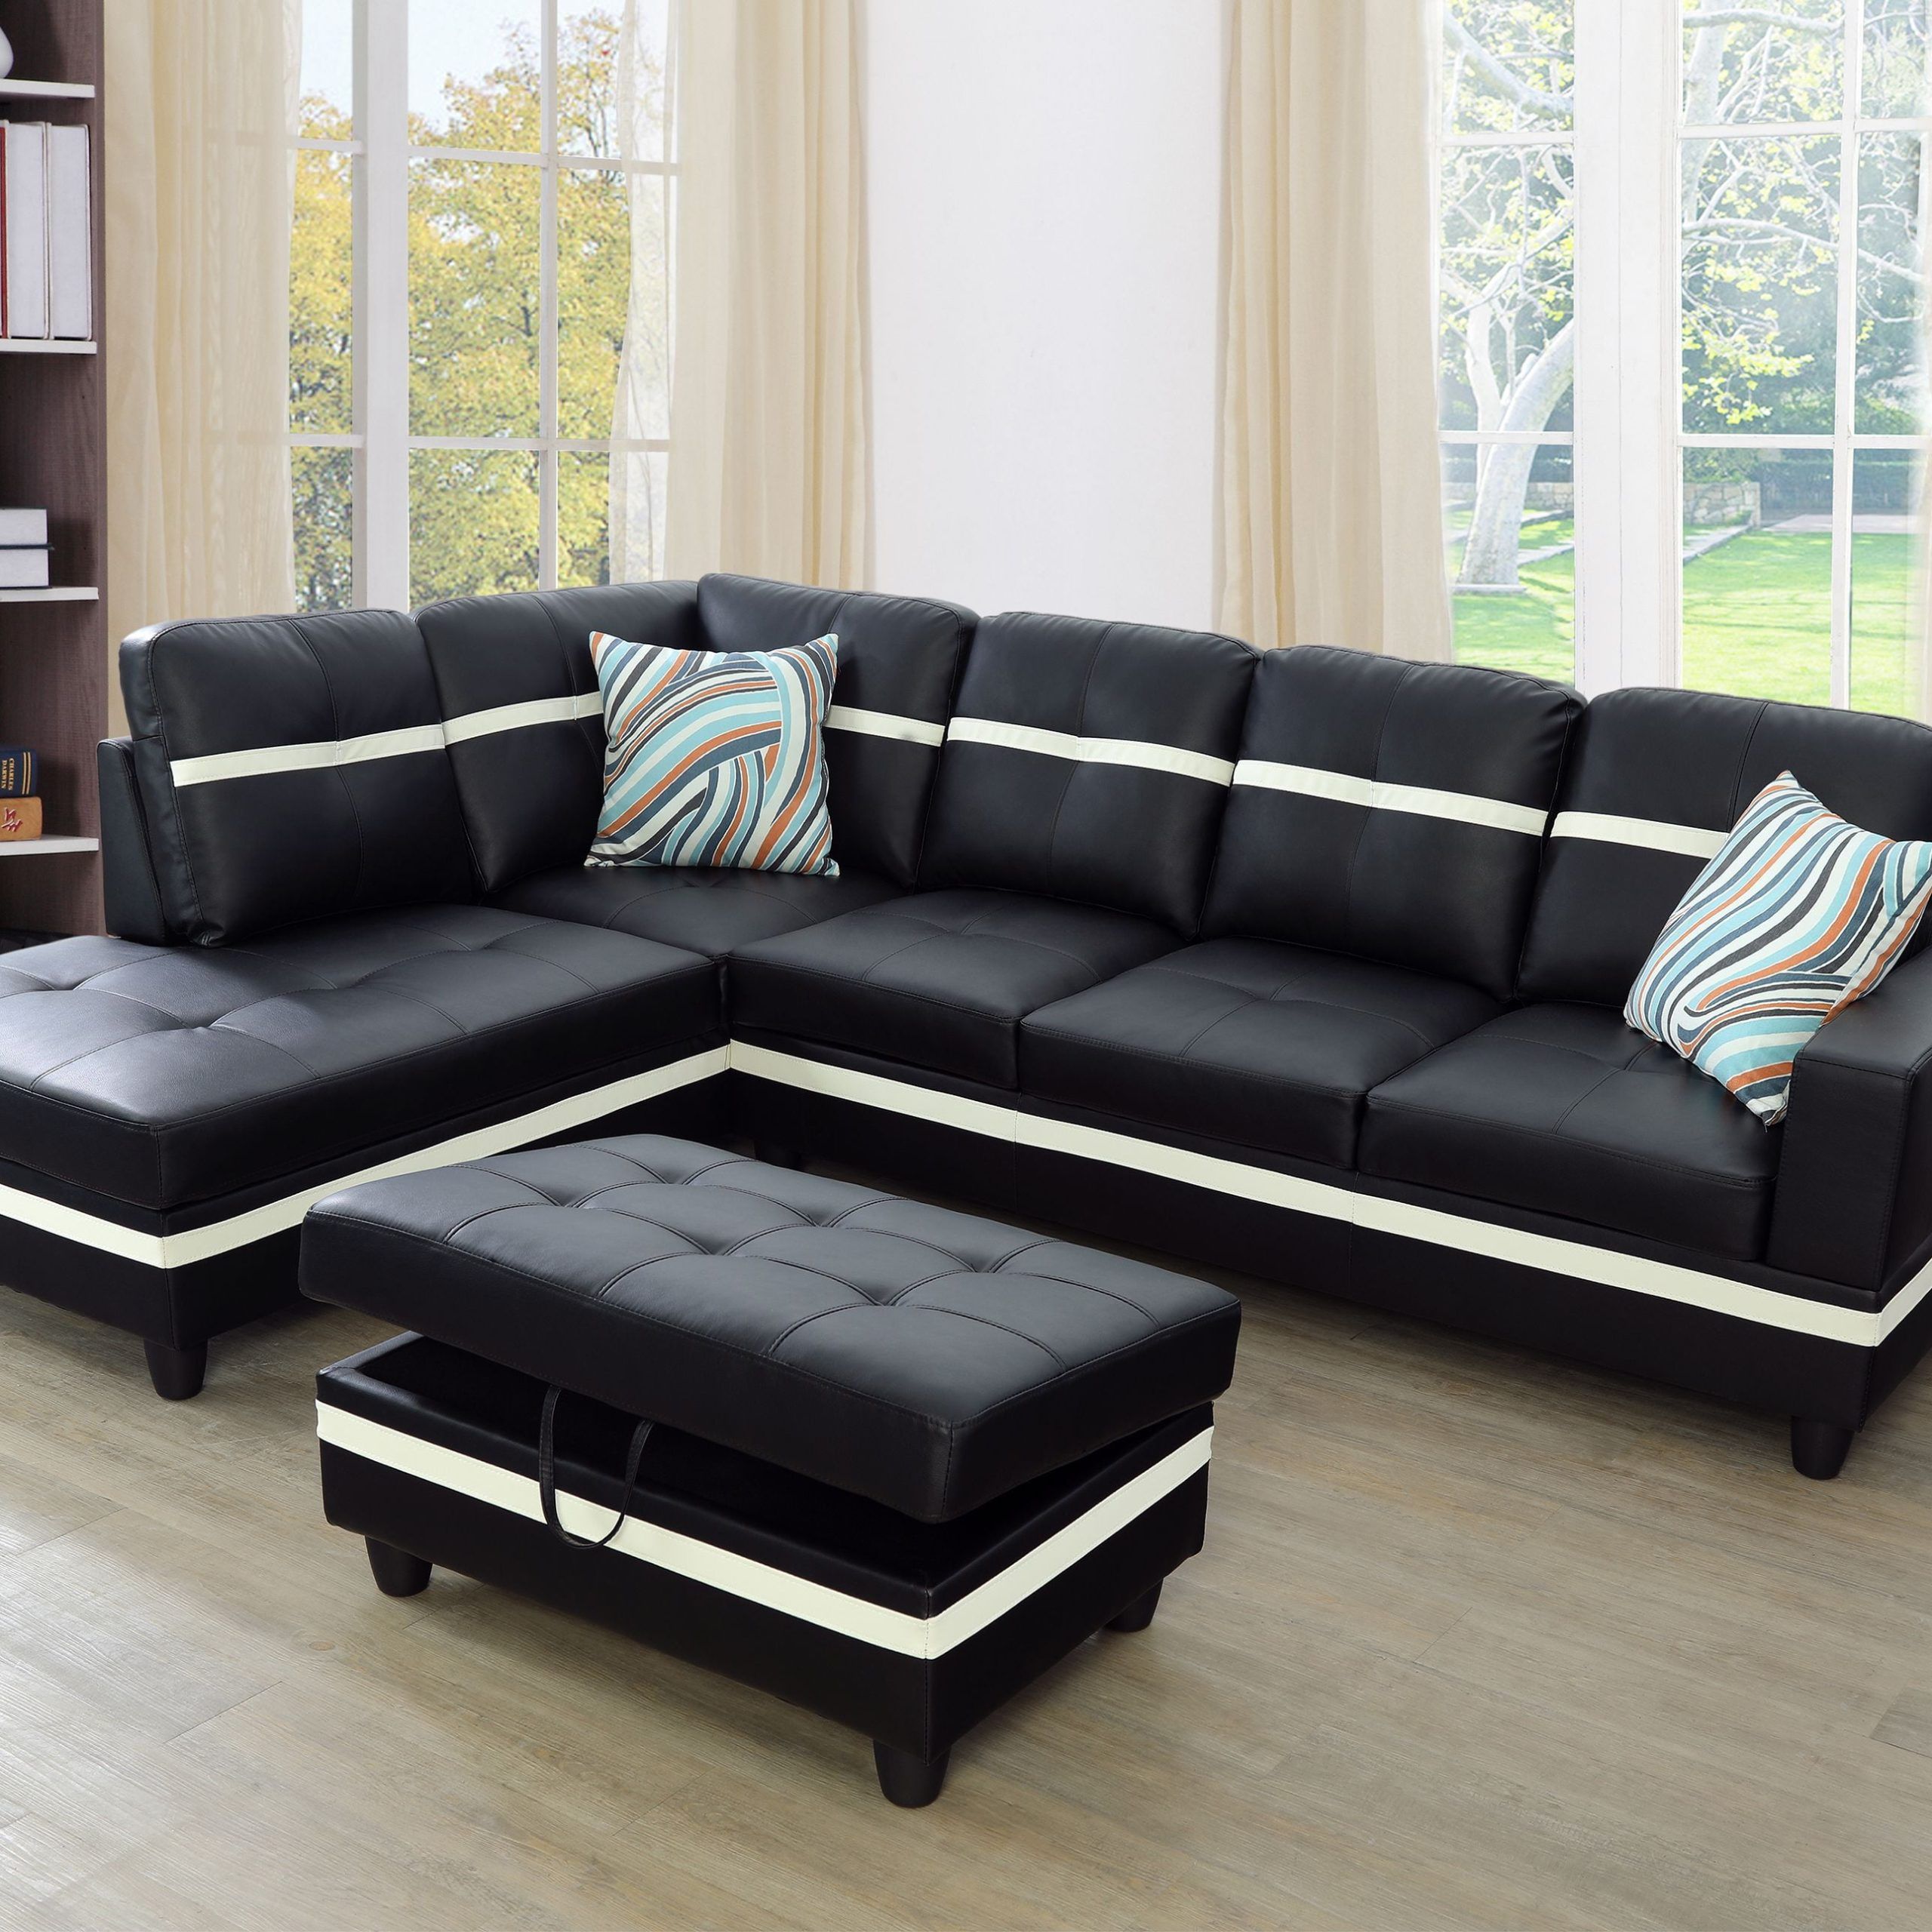 Aycp Furniture New Style  L Shape Sectional Sofa Set With Storage In Faux Leather Sectional Sofa Sets (View 3 of 20)